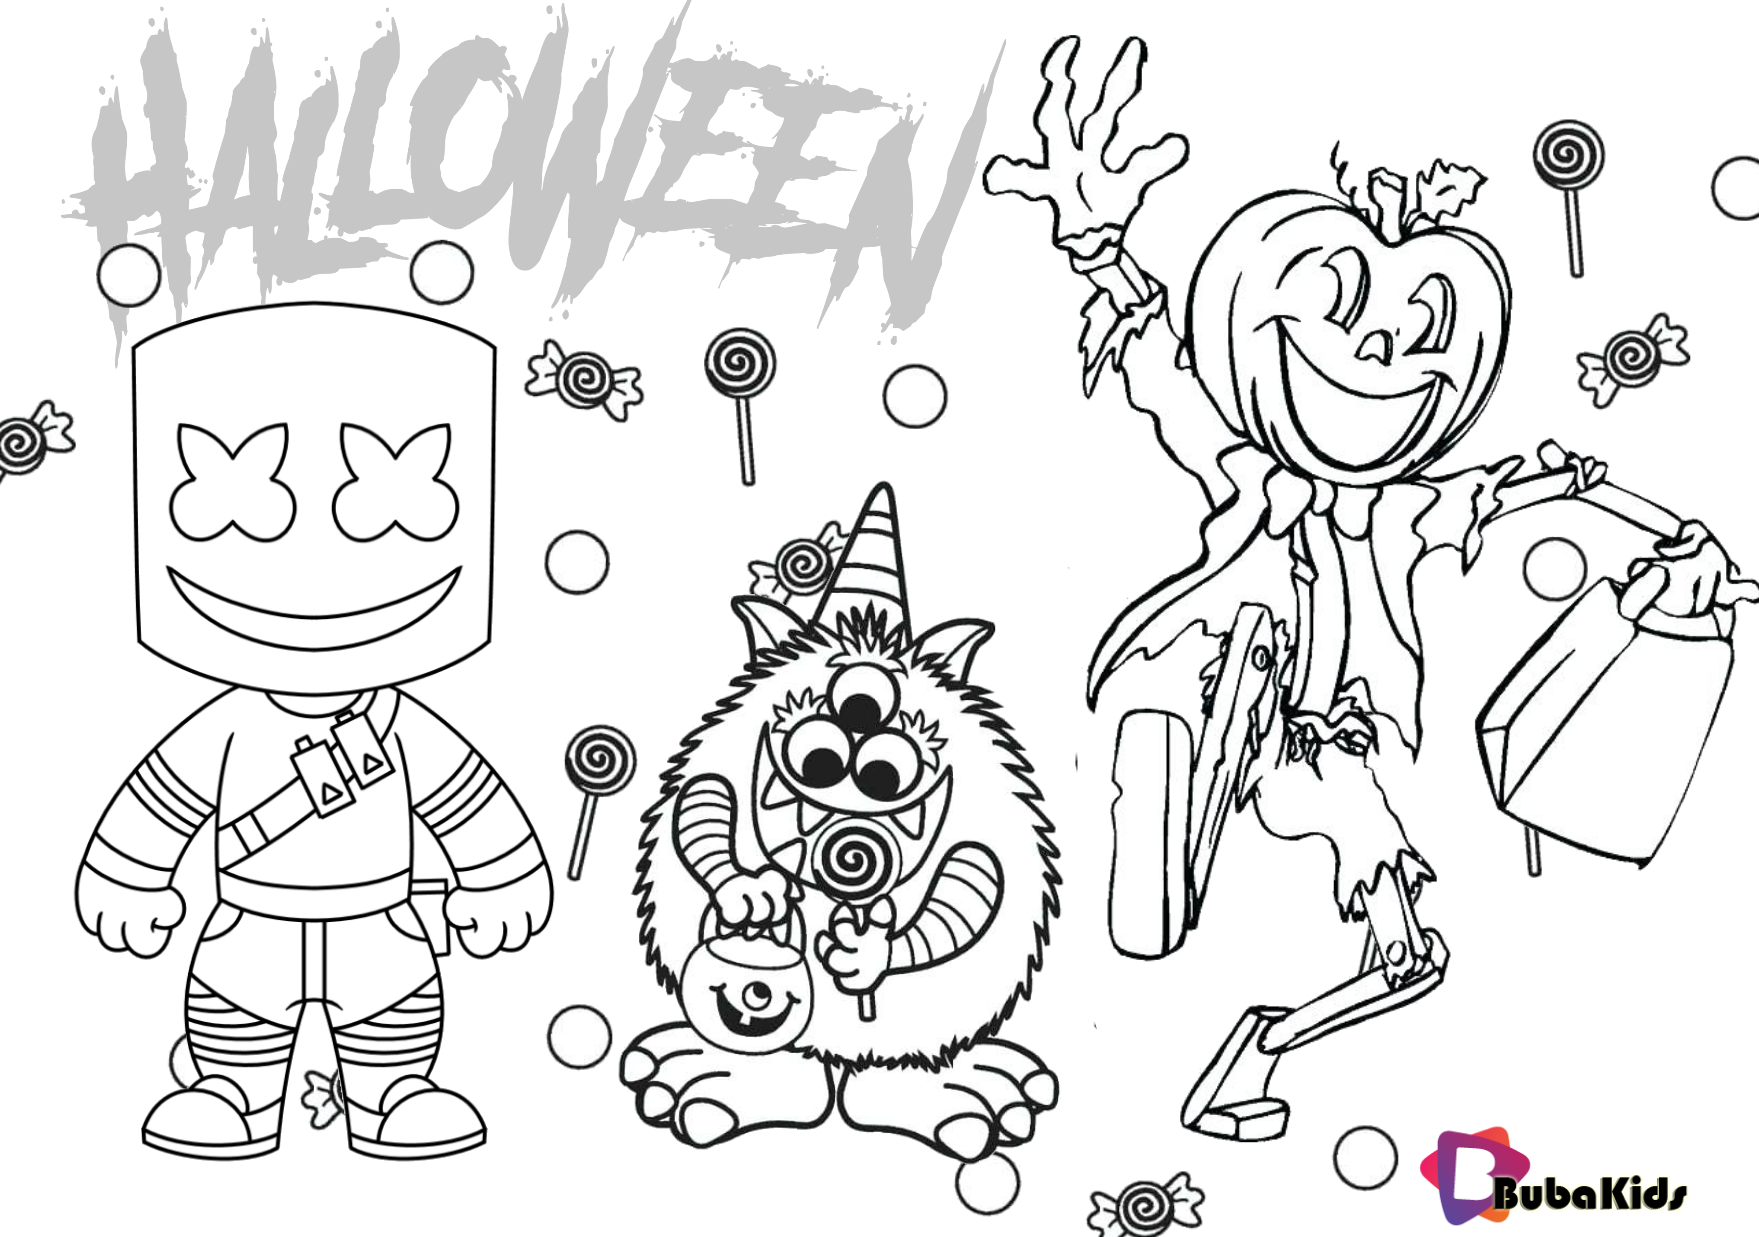 Marshmello, candy monster and jack o lantern costume ideas for halloween party coloring page.